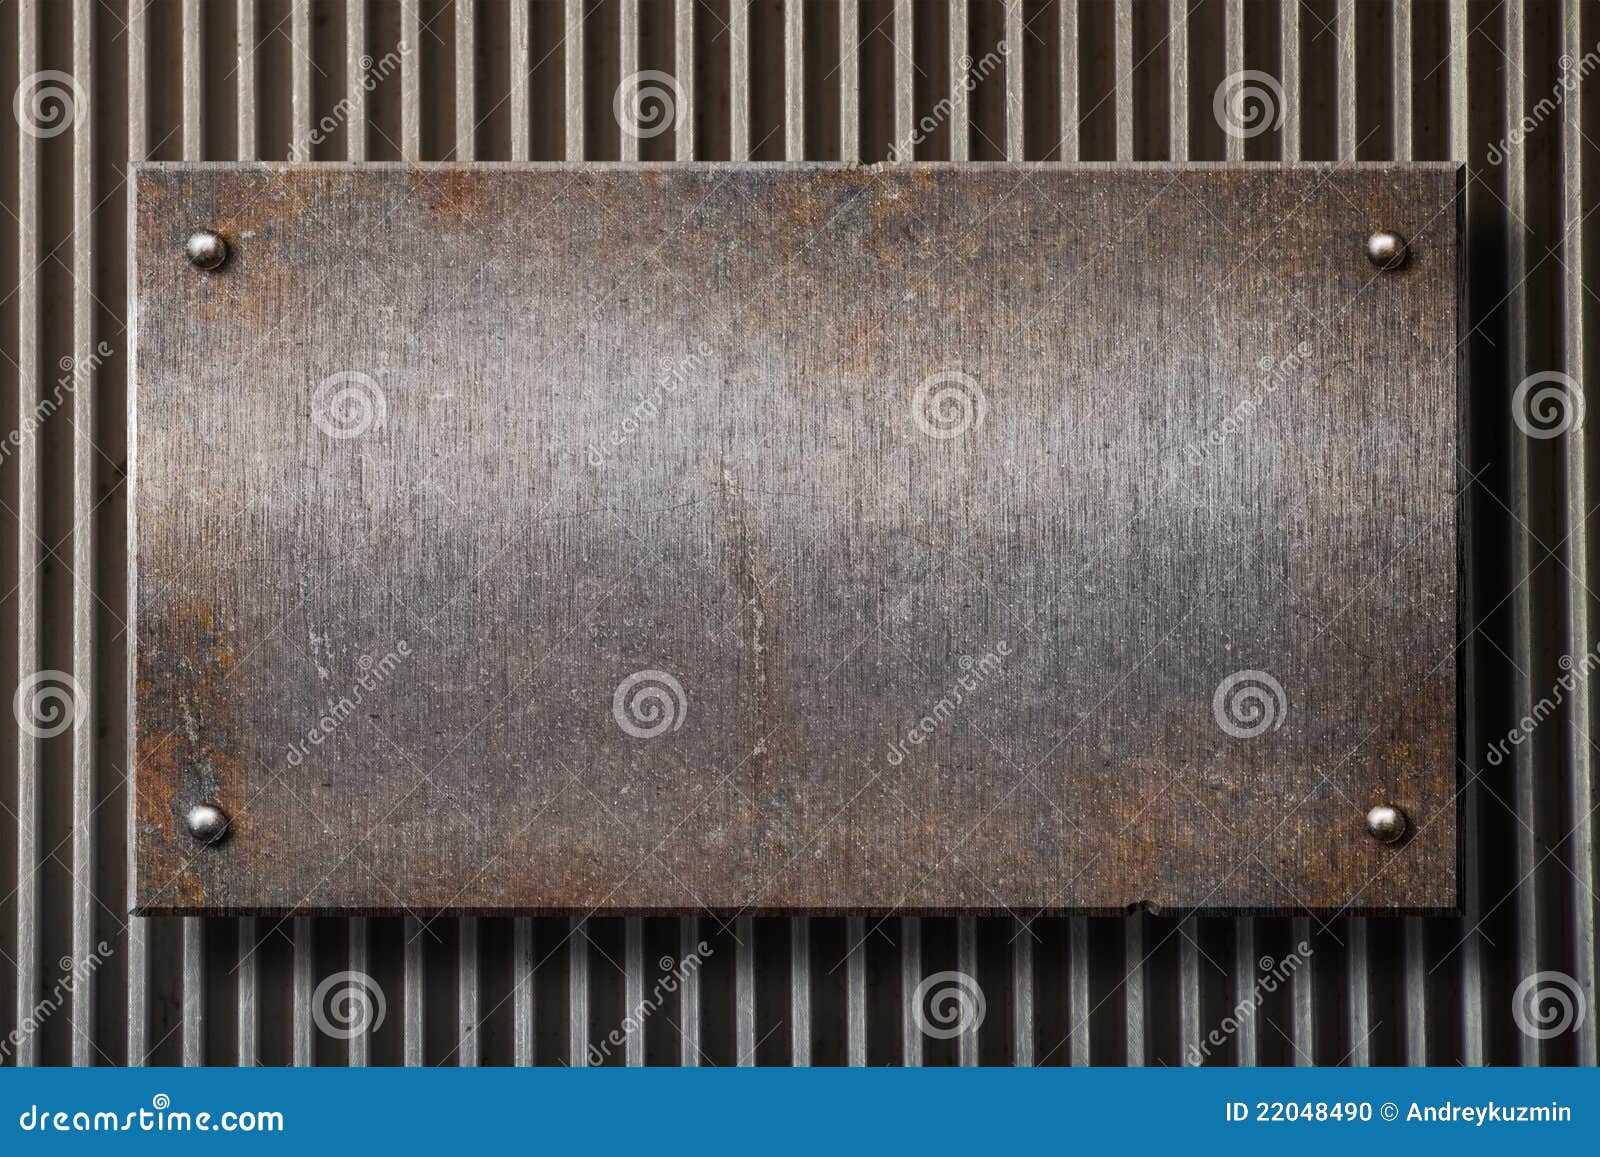 grunge rusty metal plate over grid background